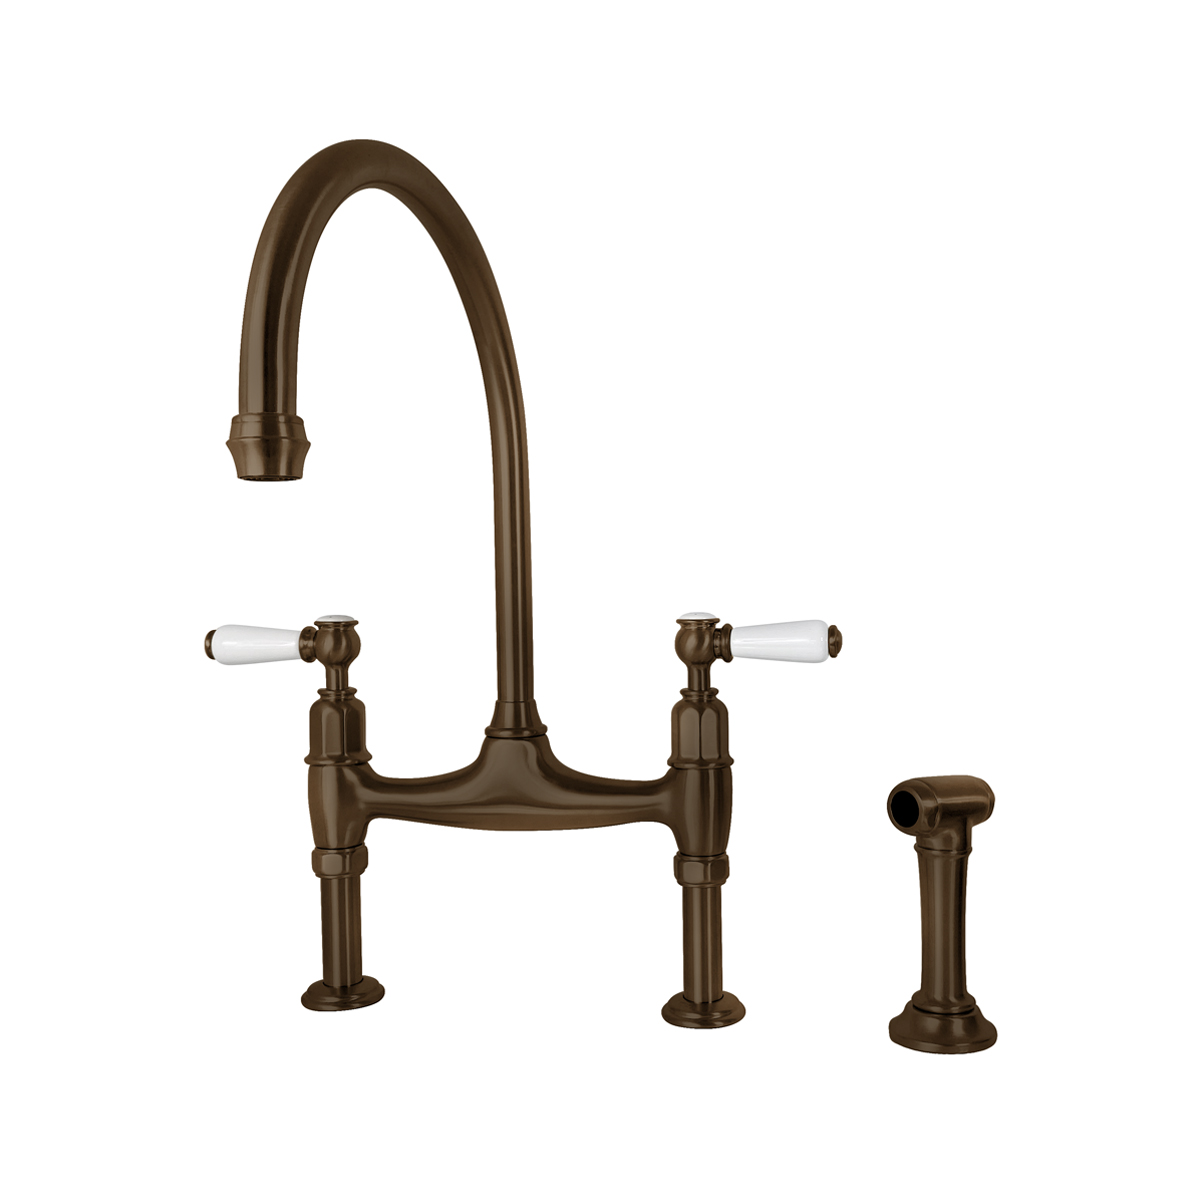 Shaws by Perrin & Rowe Pendleton bridge mixer with spray rinse in english bronze. Ionian style kitchen tap with straight unions AUSH.4173. Distributed in Australia by Luxe by Design, Brisbane.